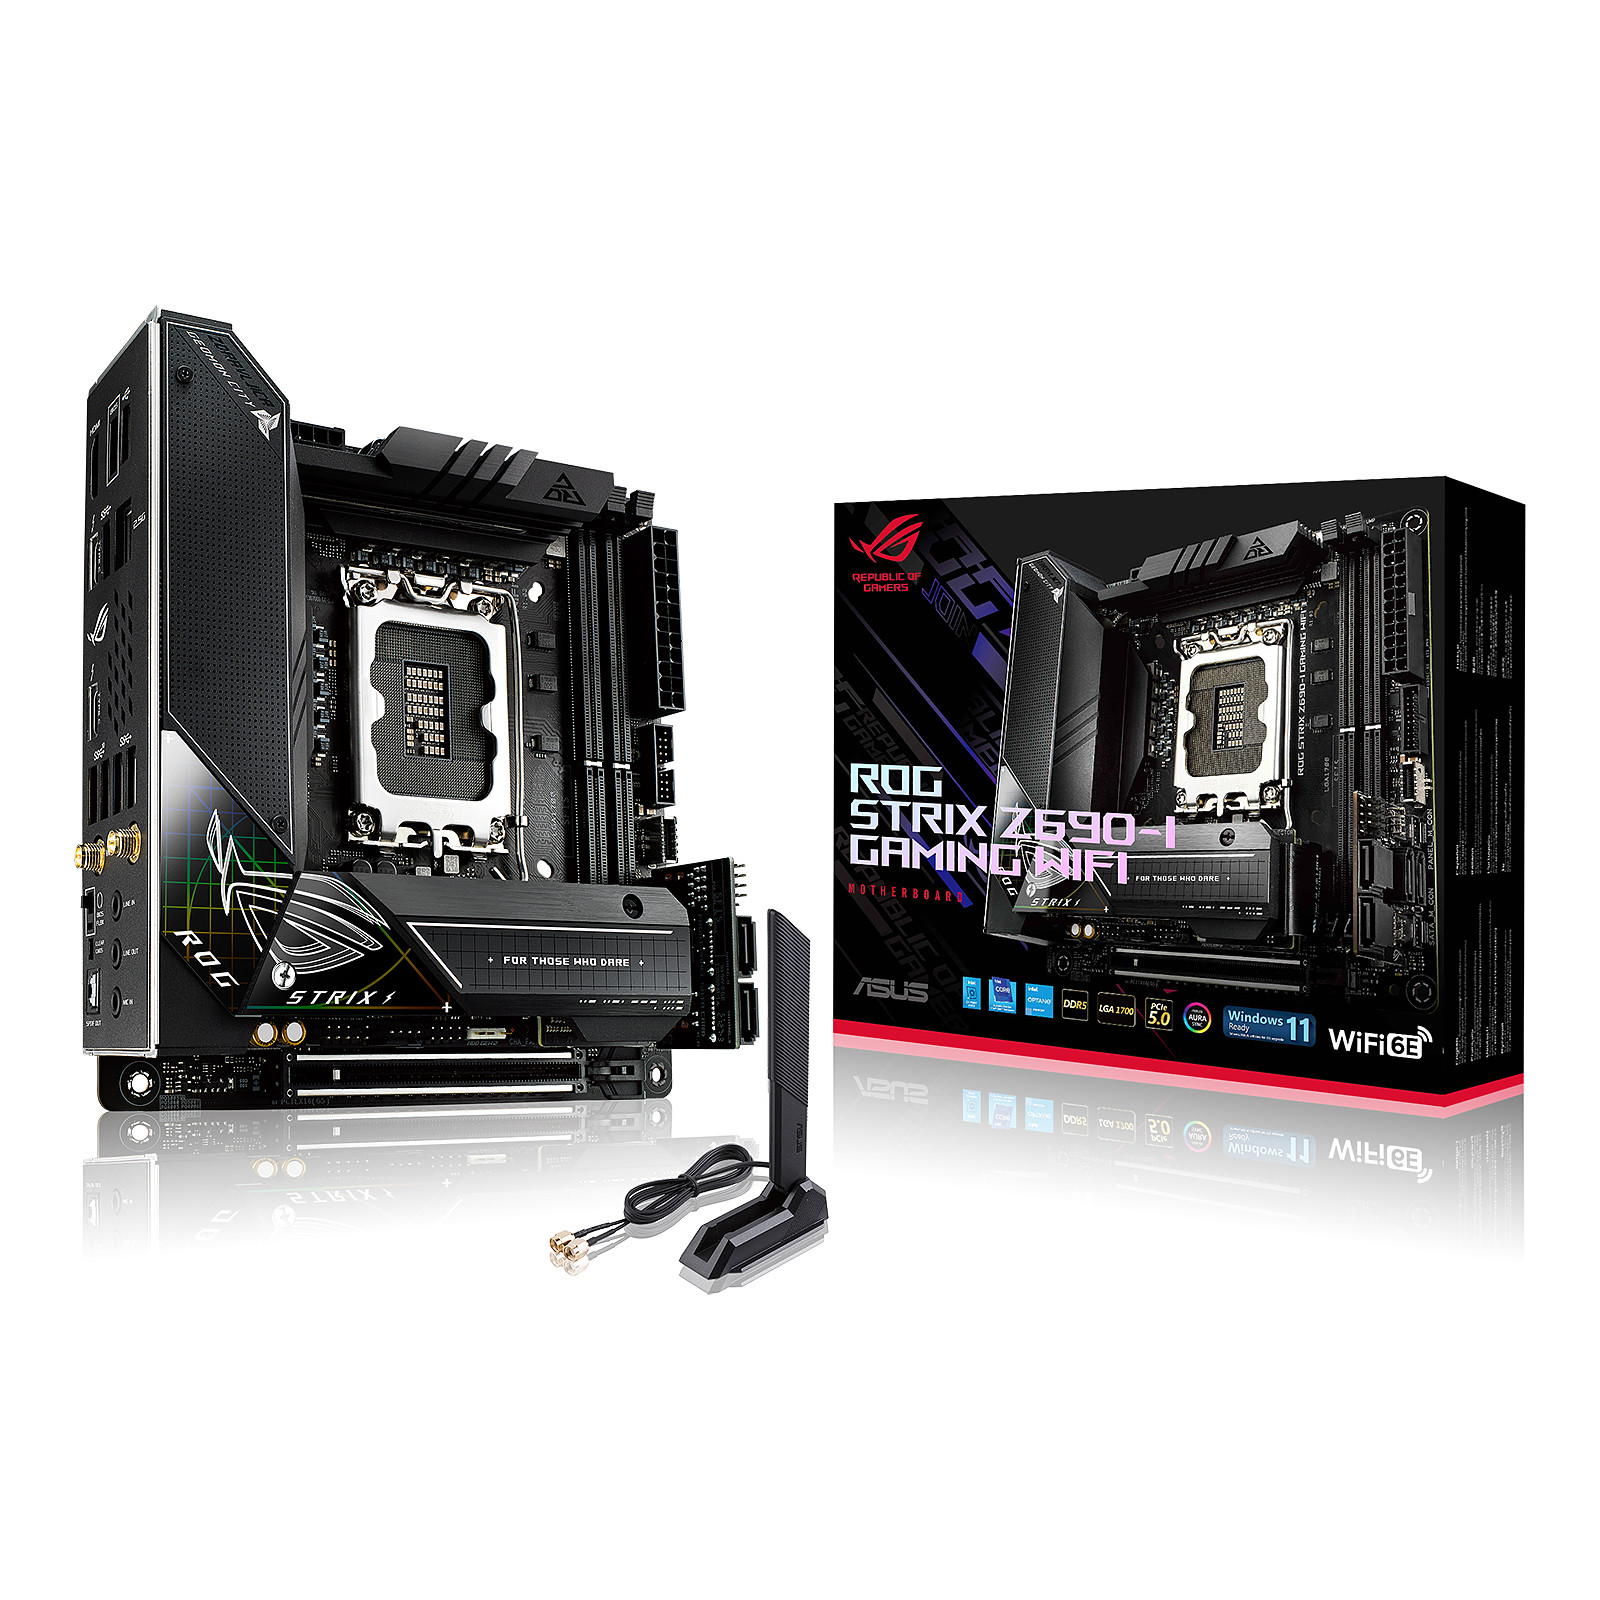 ASUS ROG STRIX Z690-I GAMING WIFI · Occasion - Carte mère ASUS - Occasion